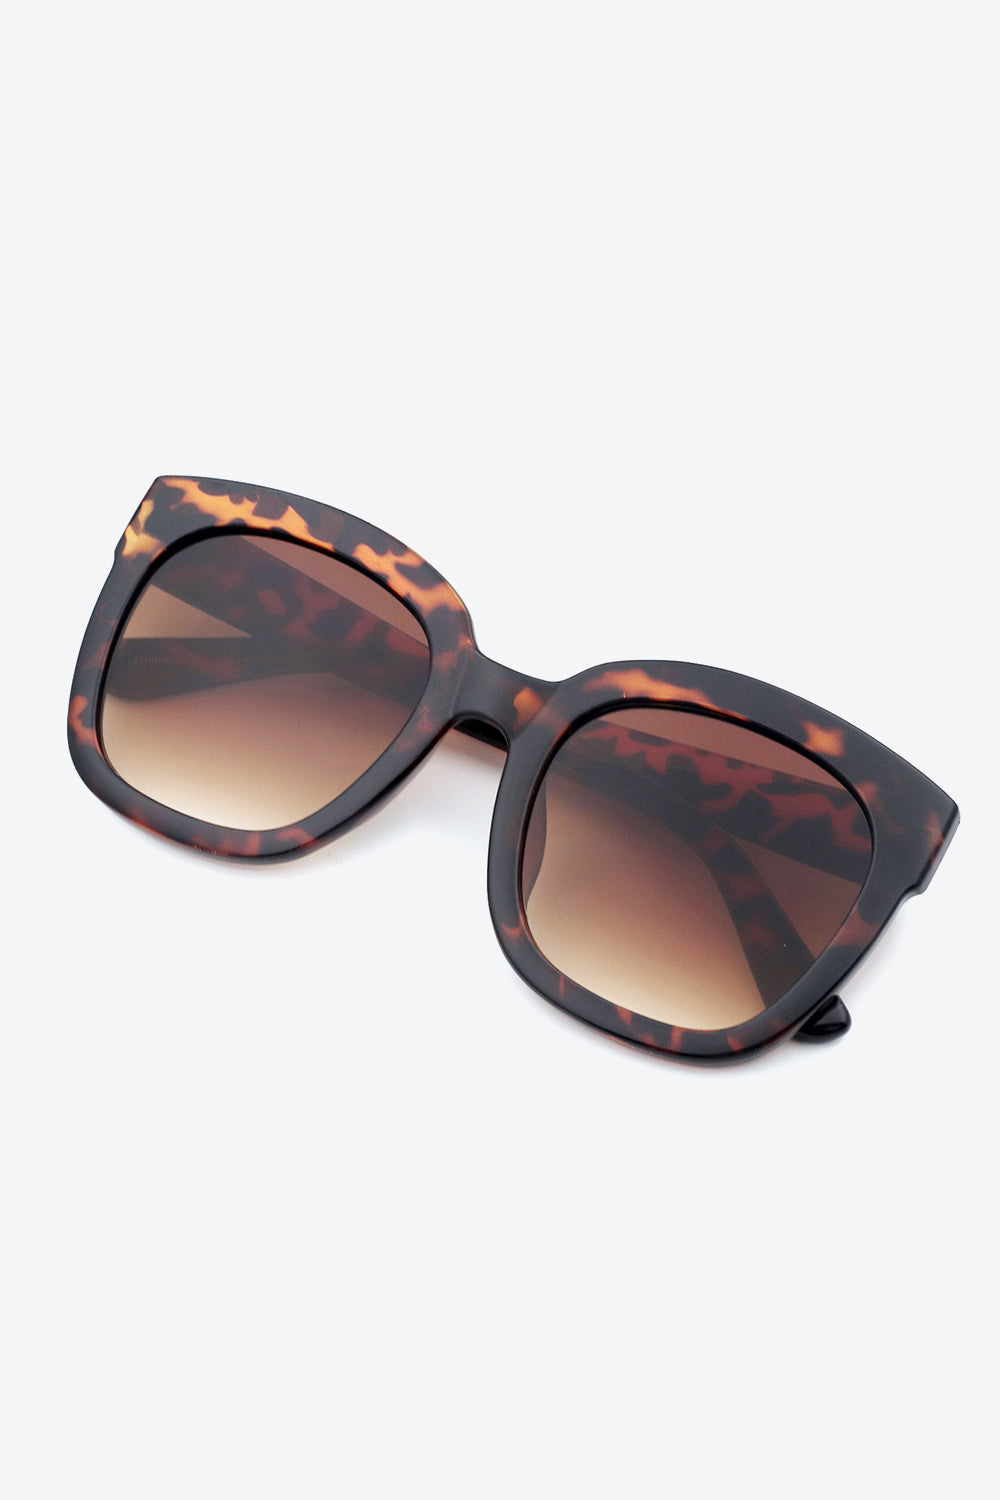 Geo Glam Sunglasses in Black and Brown